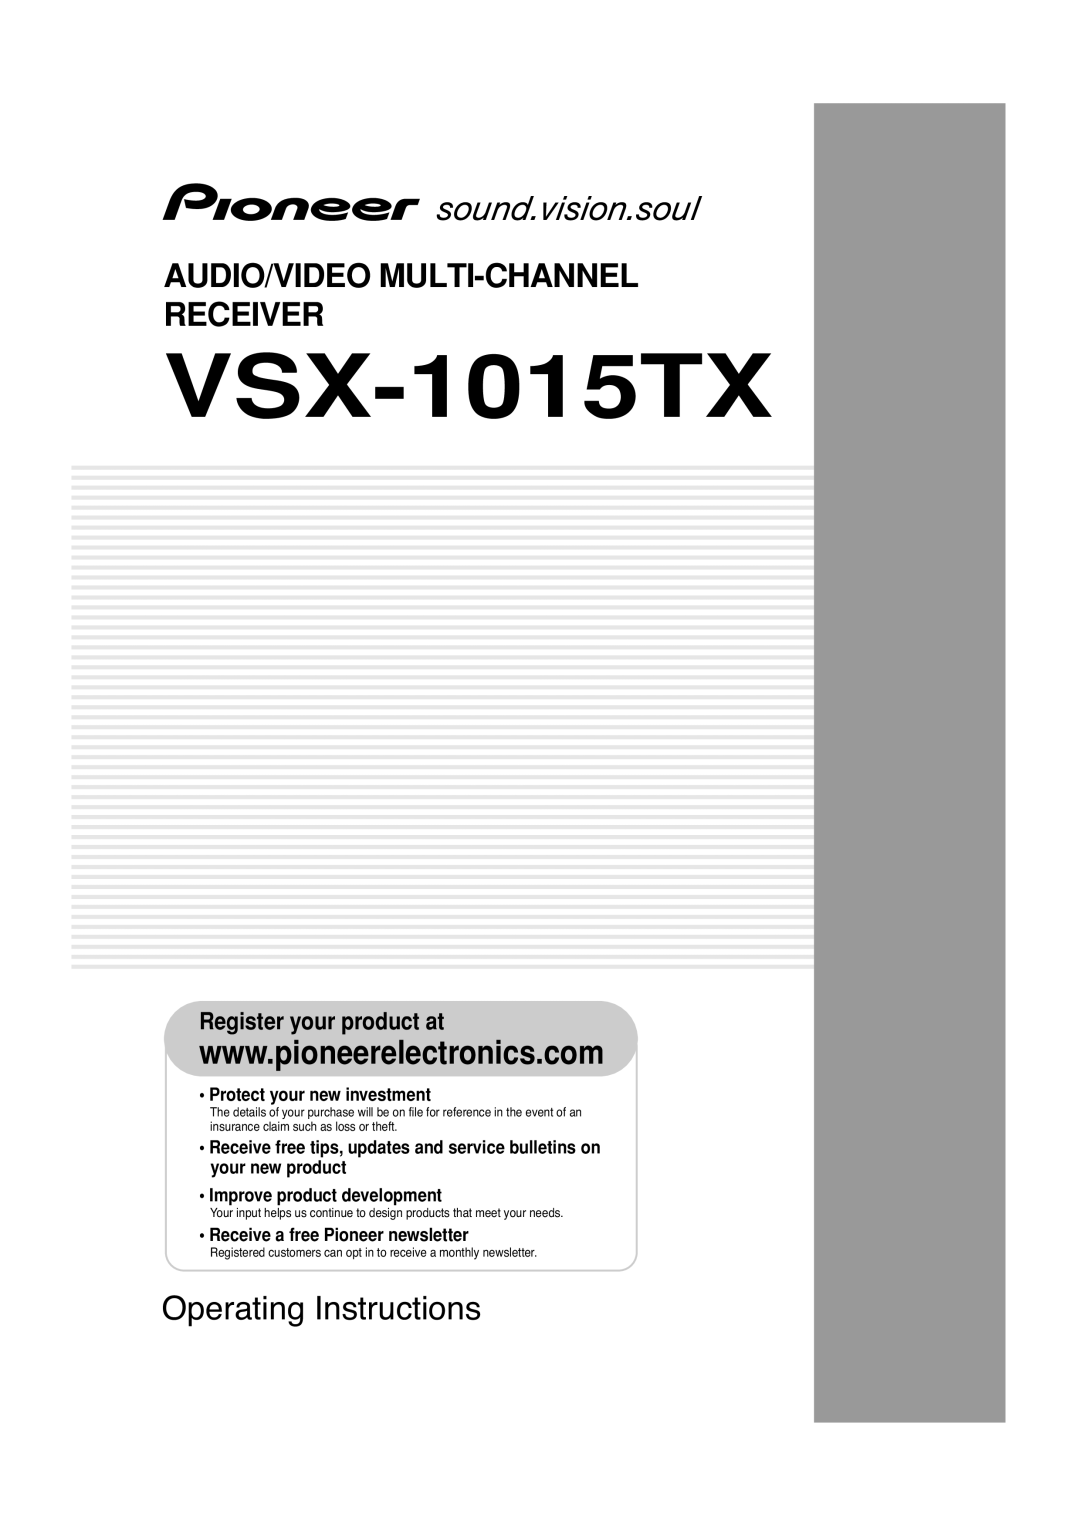 Pioneer VSX-1015TX operating instructions • Protect your new investment, •Improve product development 